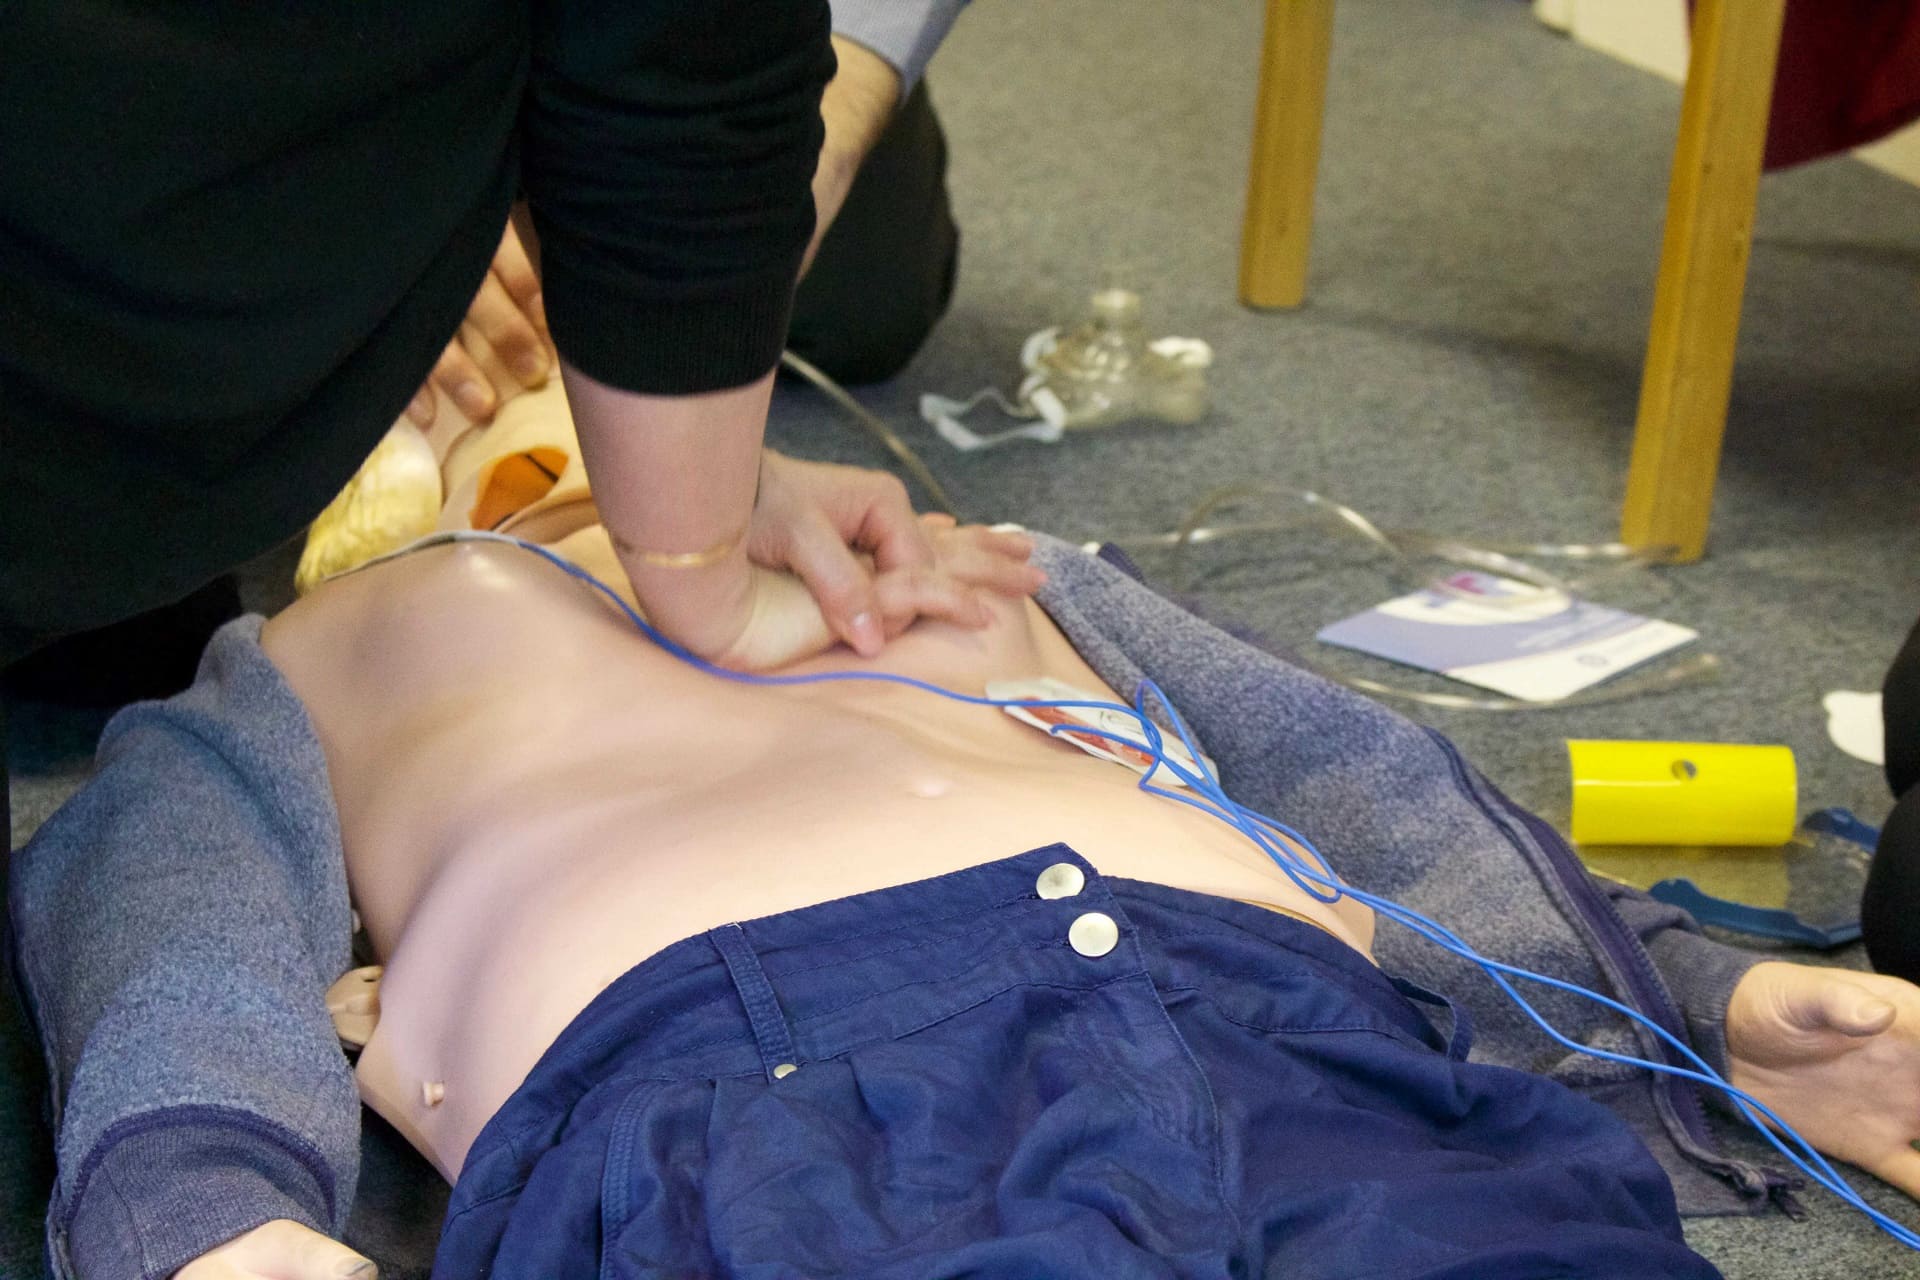 CPR being carried out on a manikin on a Lubas Medical training course